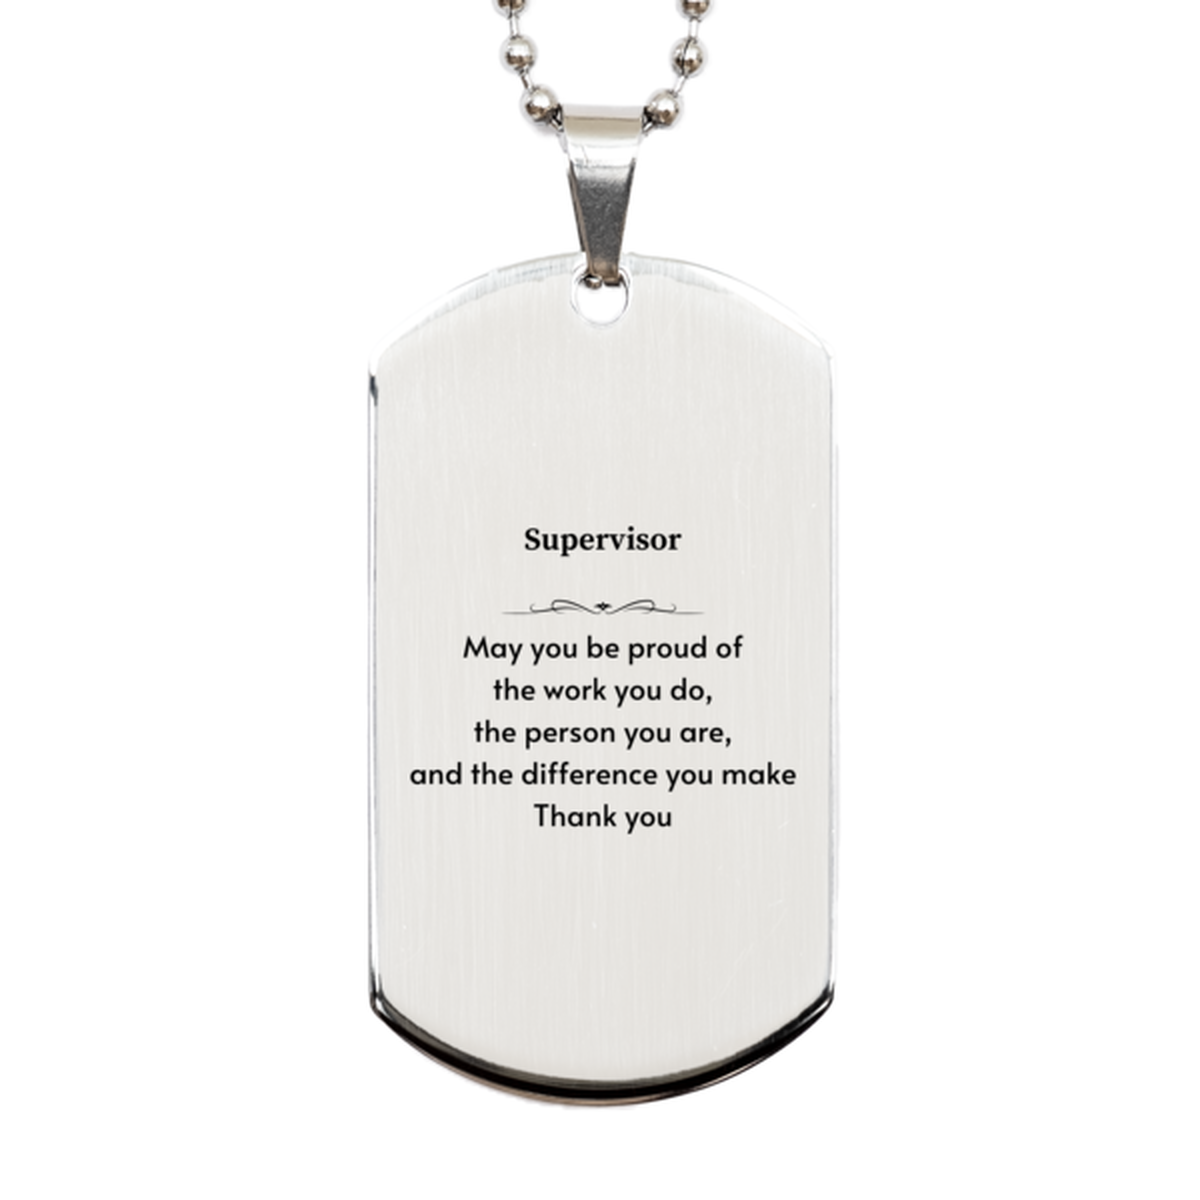 Heartwarming Silver Dog Tag Retirement Coworkers Gifts for Supervisor, Supervisor May You be proud of the work you do, the person you are Gifts for Boss Men Women Friends